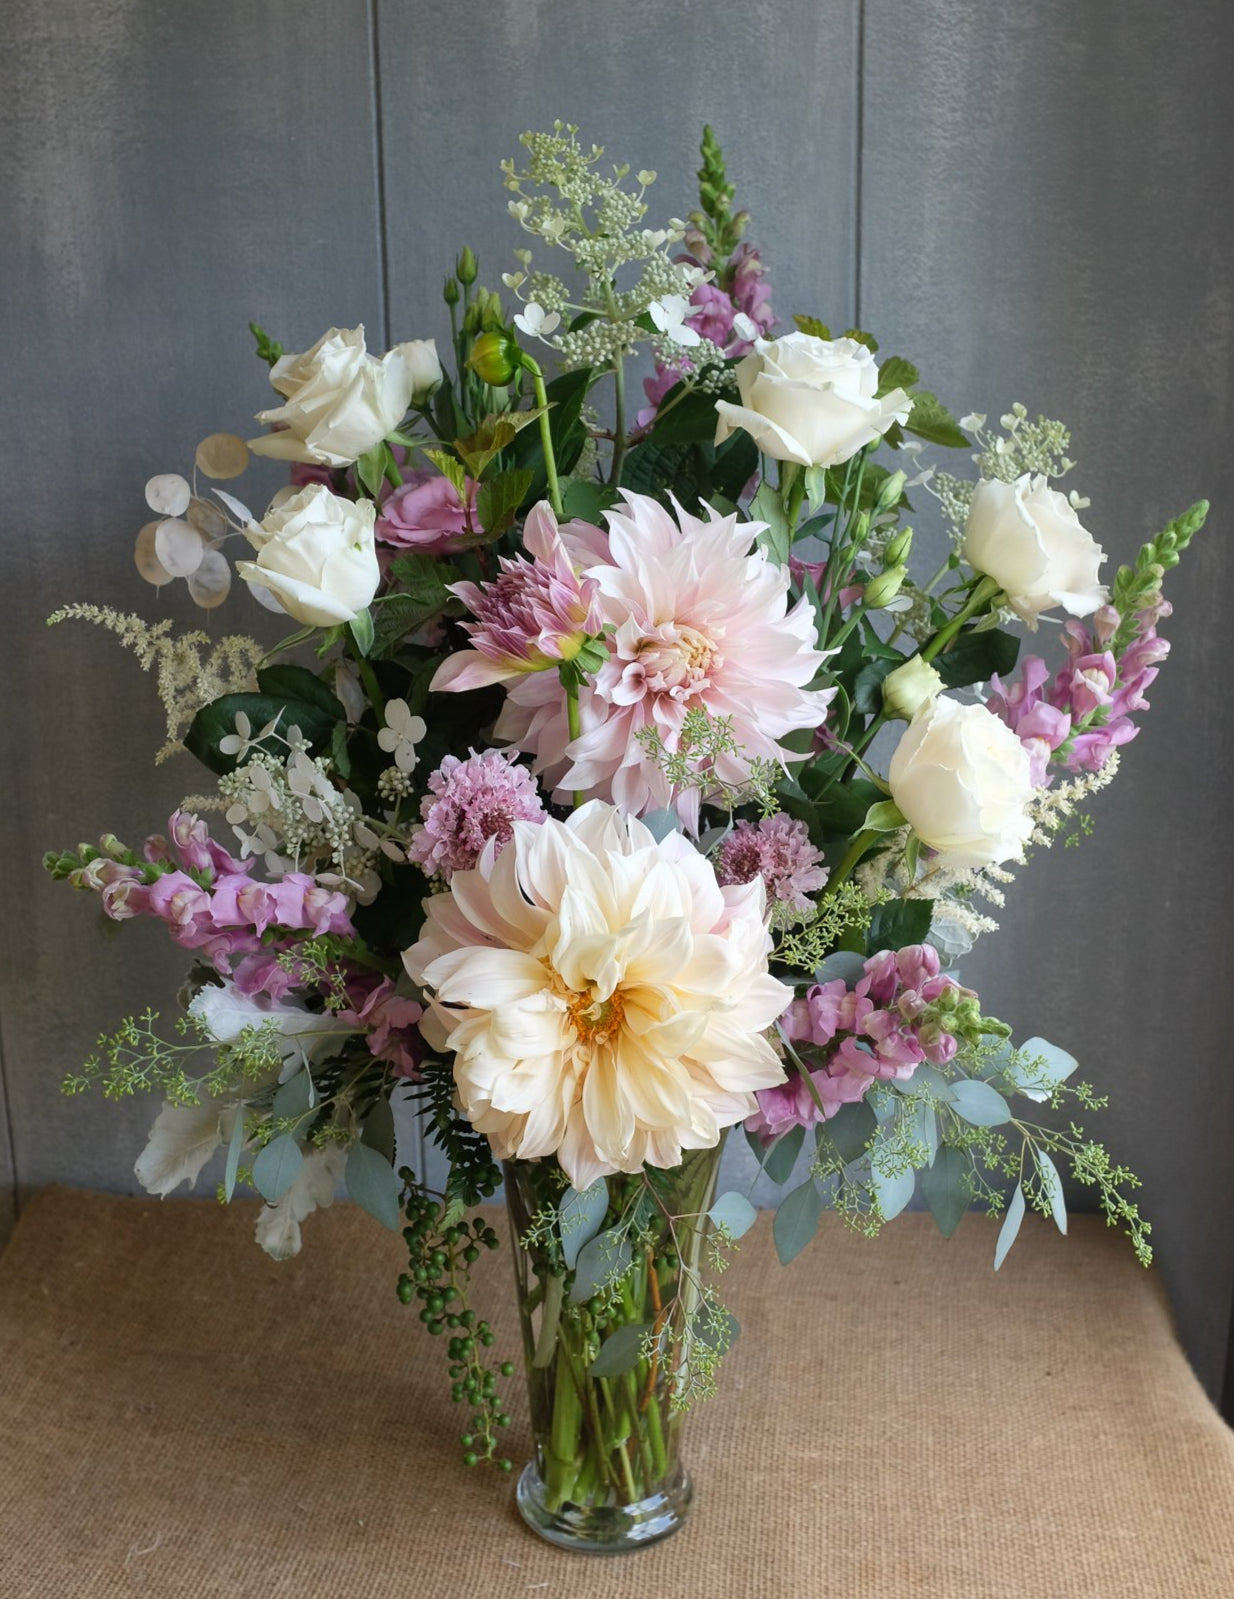 Floral arrangement with dahlias, astilbe, white roses, pink snapdragon by Michler's Florist